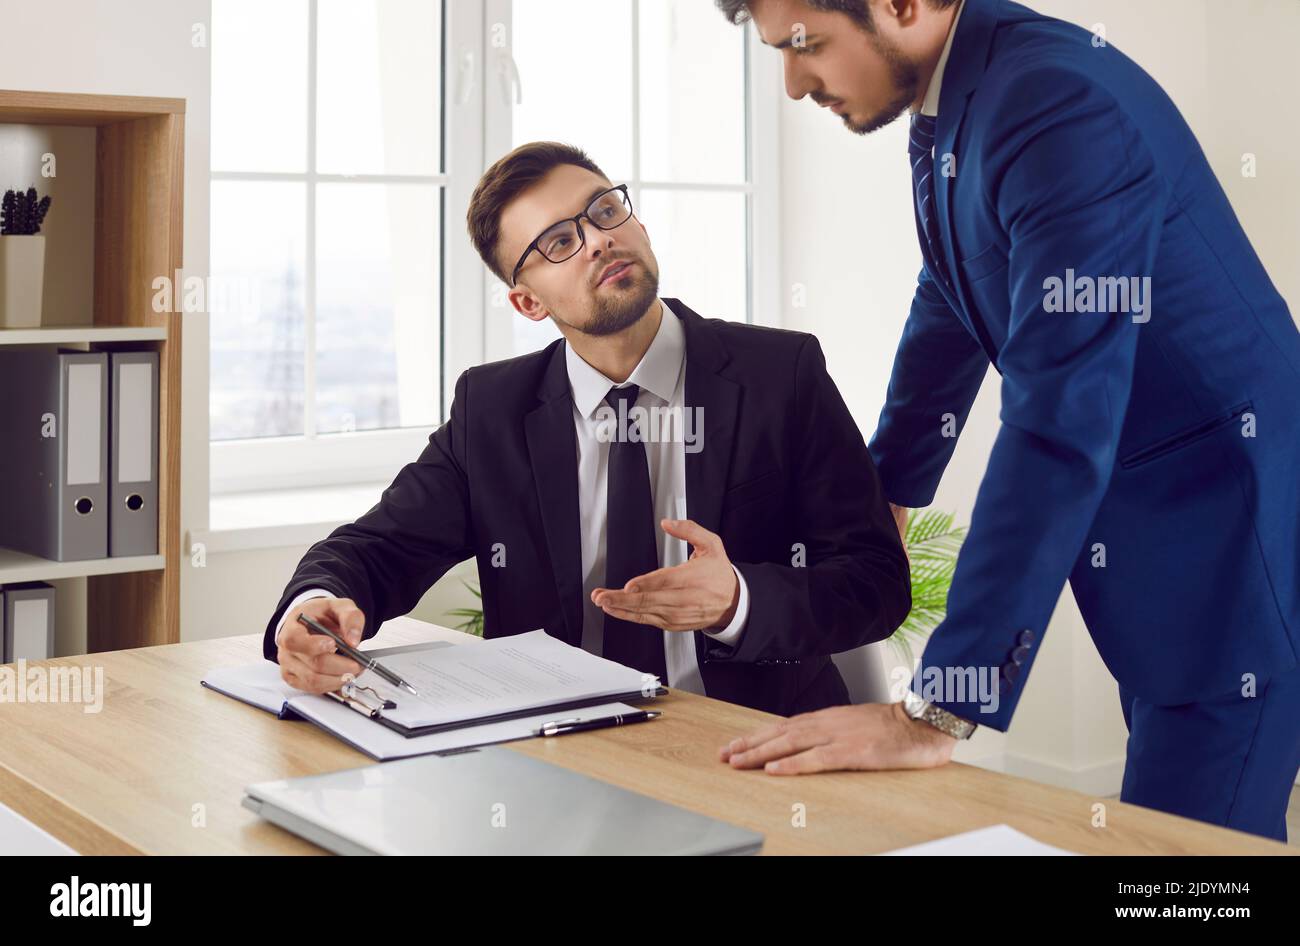 Insurance agent or lawyer giving consultation to young man during their meeting in office Stock Photo